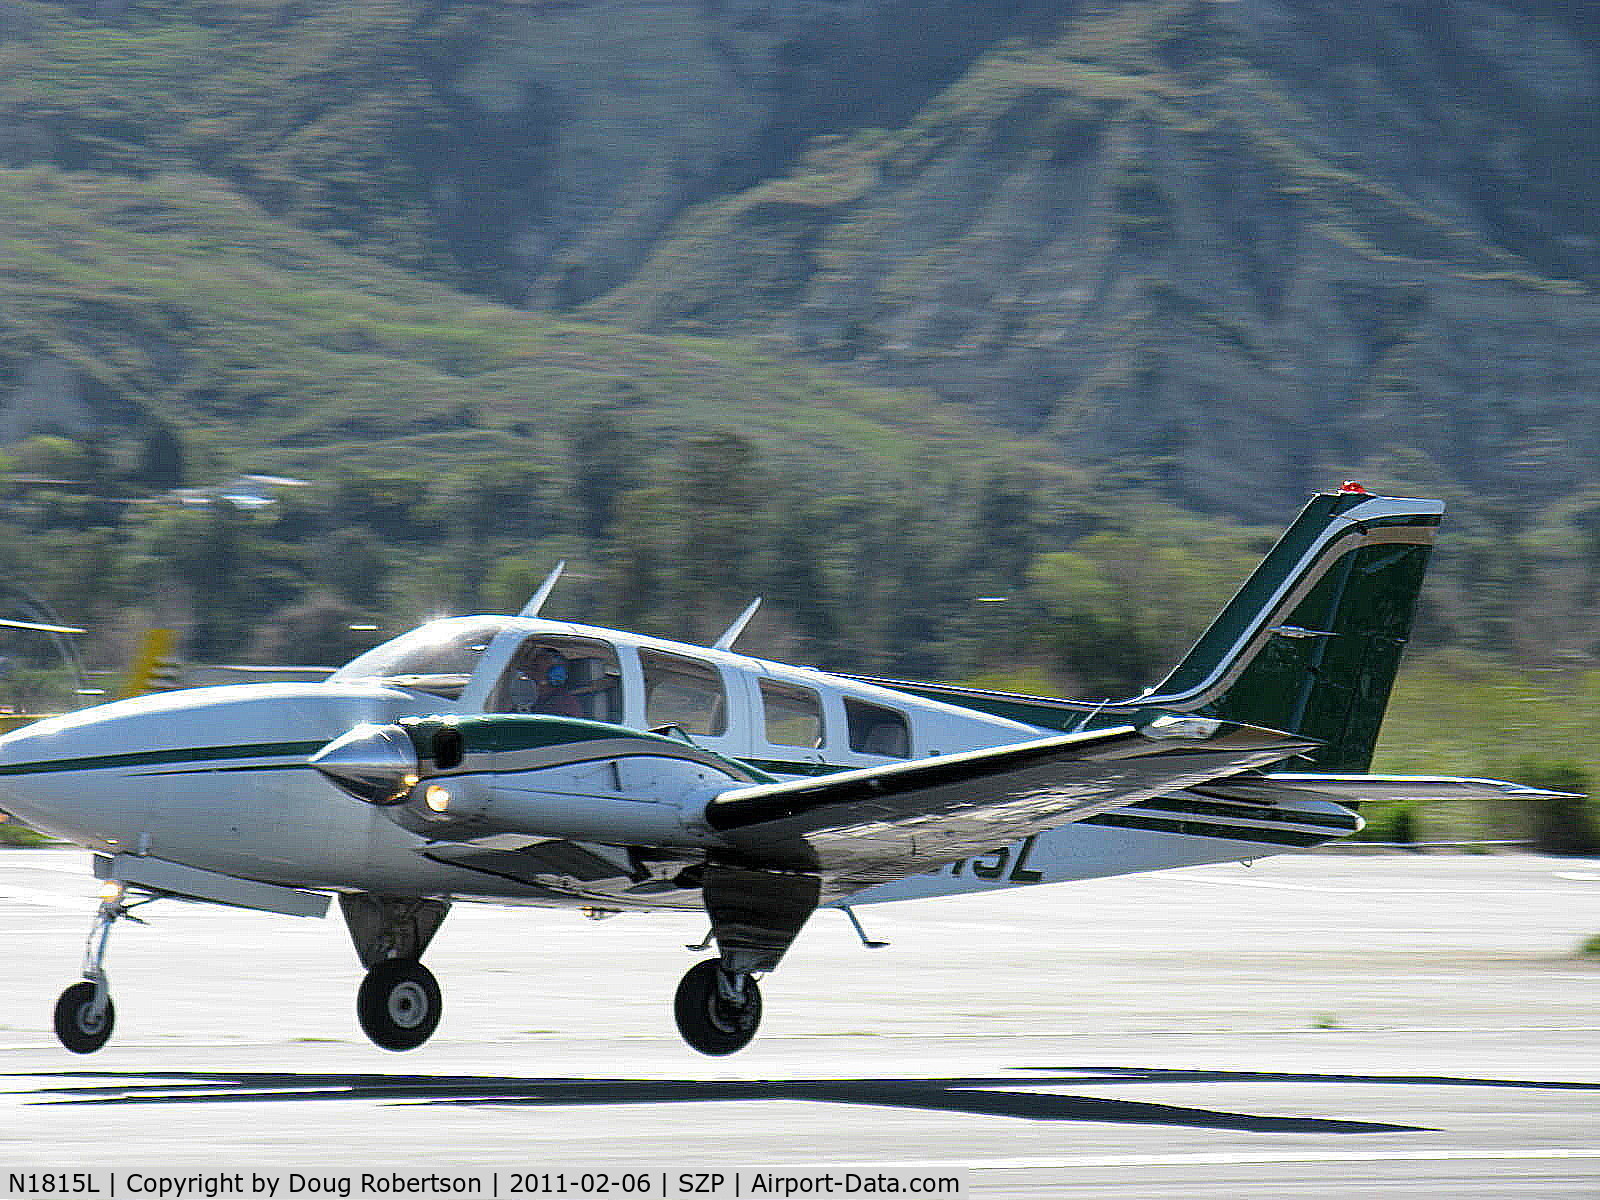 N1815L, 1976 Beech 58P Baron C/N TJ-63, 1976 Beech 58P BARON, two Continental TSIO-520-LB1C 310 Hp each, turbosupercharged & pressurized, first year of production, takeoff Rwy 04